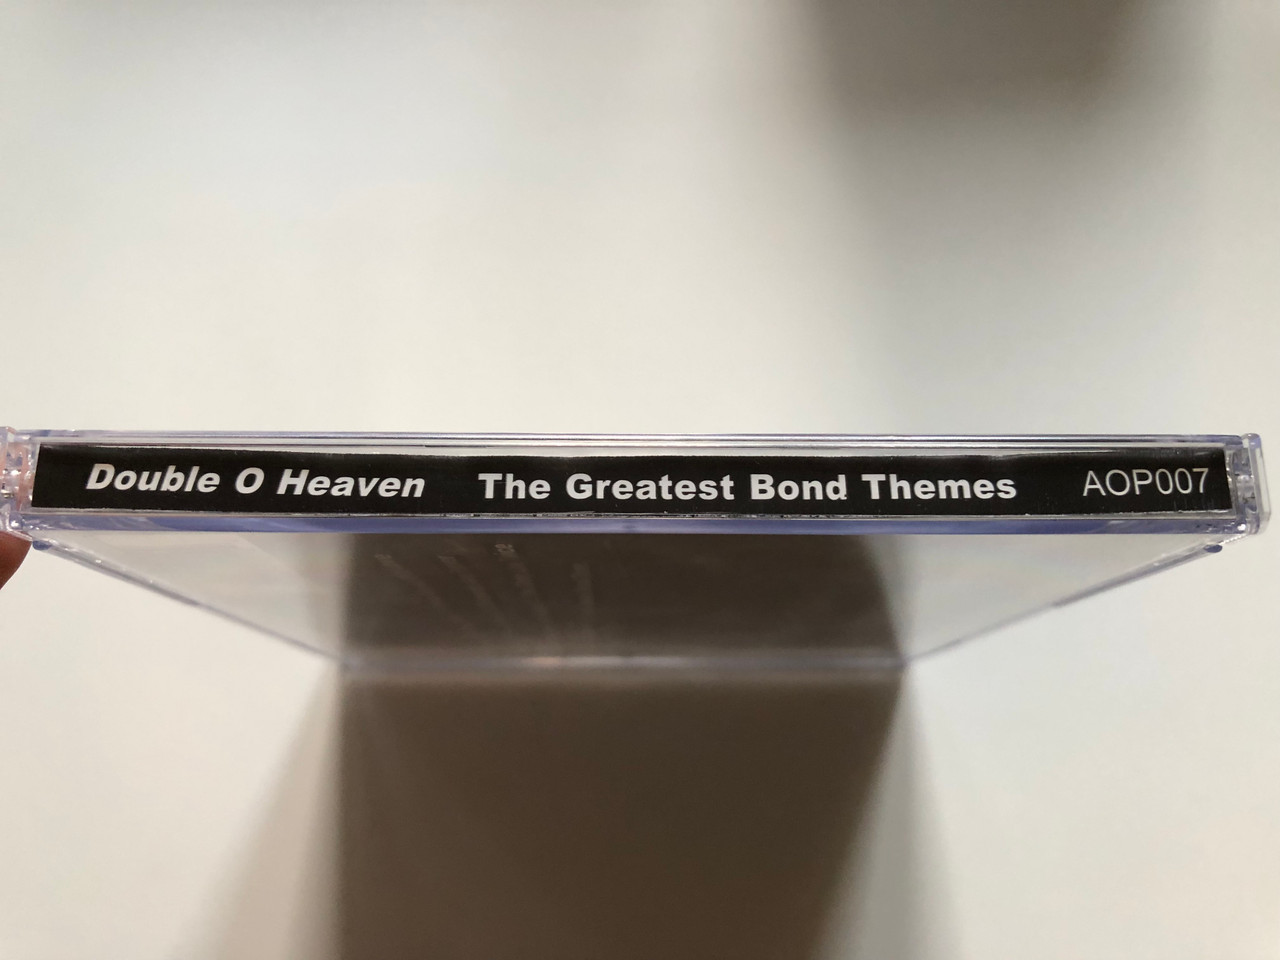 https://cdn10.bigcommerce.com/s-62bdpkt7pb/products/0/images/231075/Double_O_Heaven_-_The_Greatest_Bond_Themes_Diamonds_Are_Forever_From_Russia_With_Love_ThunderballWe_Have_All_The_Time_In_The_World_The_James_Bond_Theme_Nobody_Does_It_Better_Doppelga_3__44405.1654179665.1280.1280.JPG?c=2&_gl=1*3lj4vy*_ga*MjA2NTIxMjE2MC4xNTkwNTEyNTMy*_ga_WS2VZYPC6G*MTY1NDE3Nzk5OS40MTkuMS4xNjU0MTc5NDU2LjU3